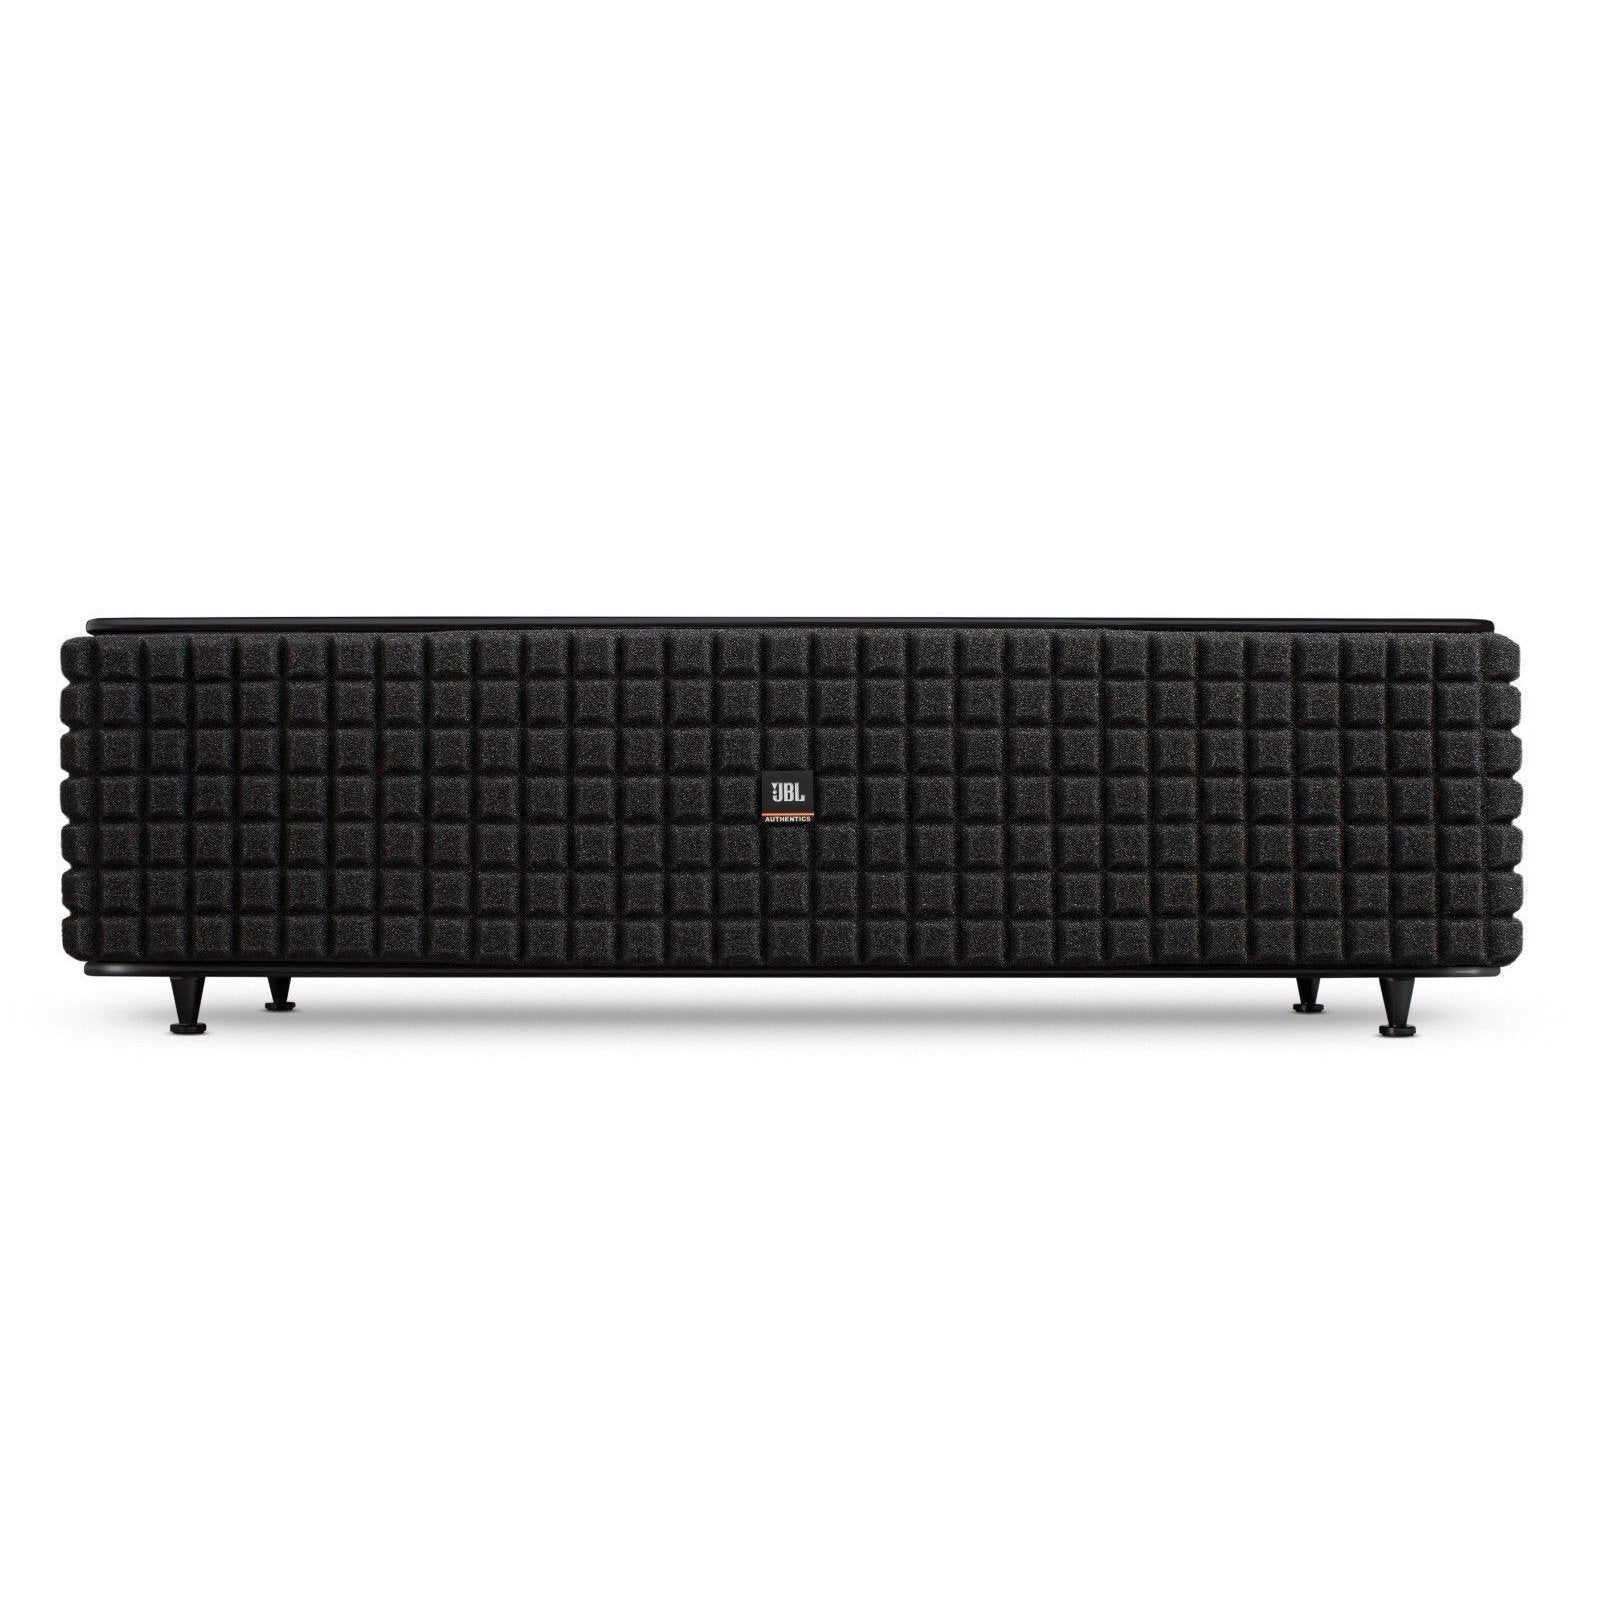 JBL Premium Sound 2.0-Ch Home Theater Stereo System